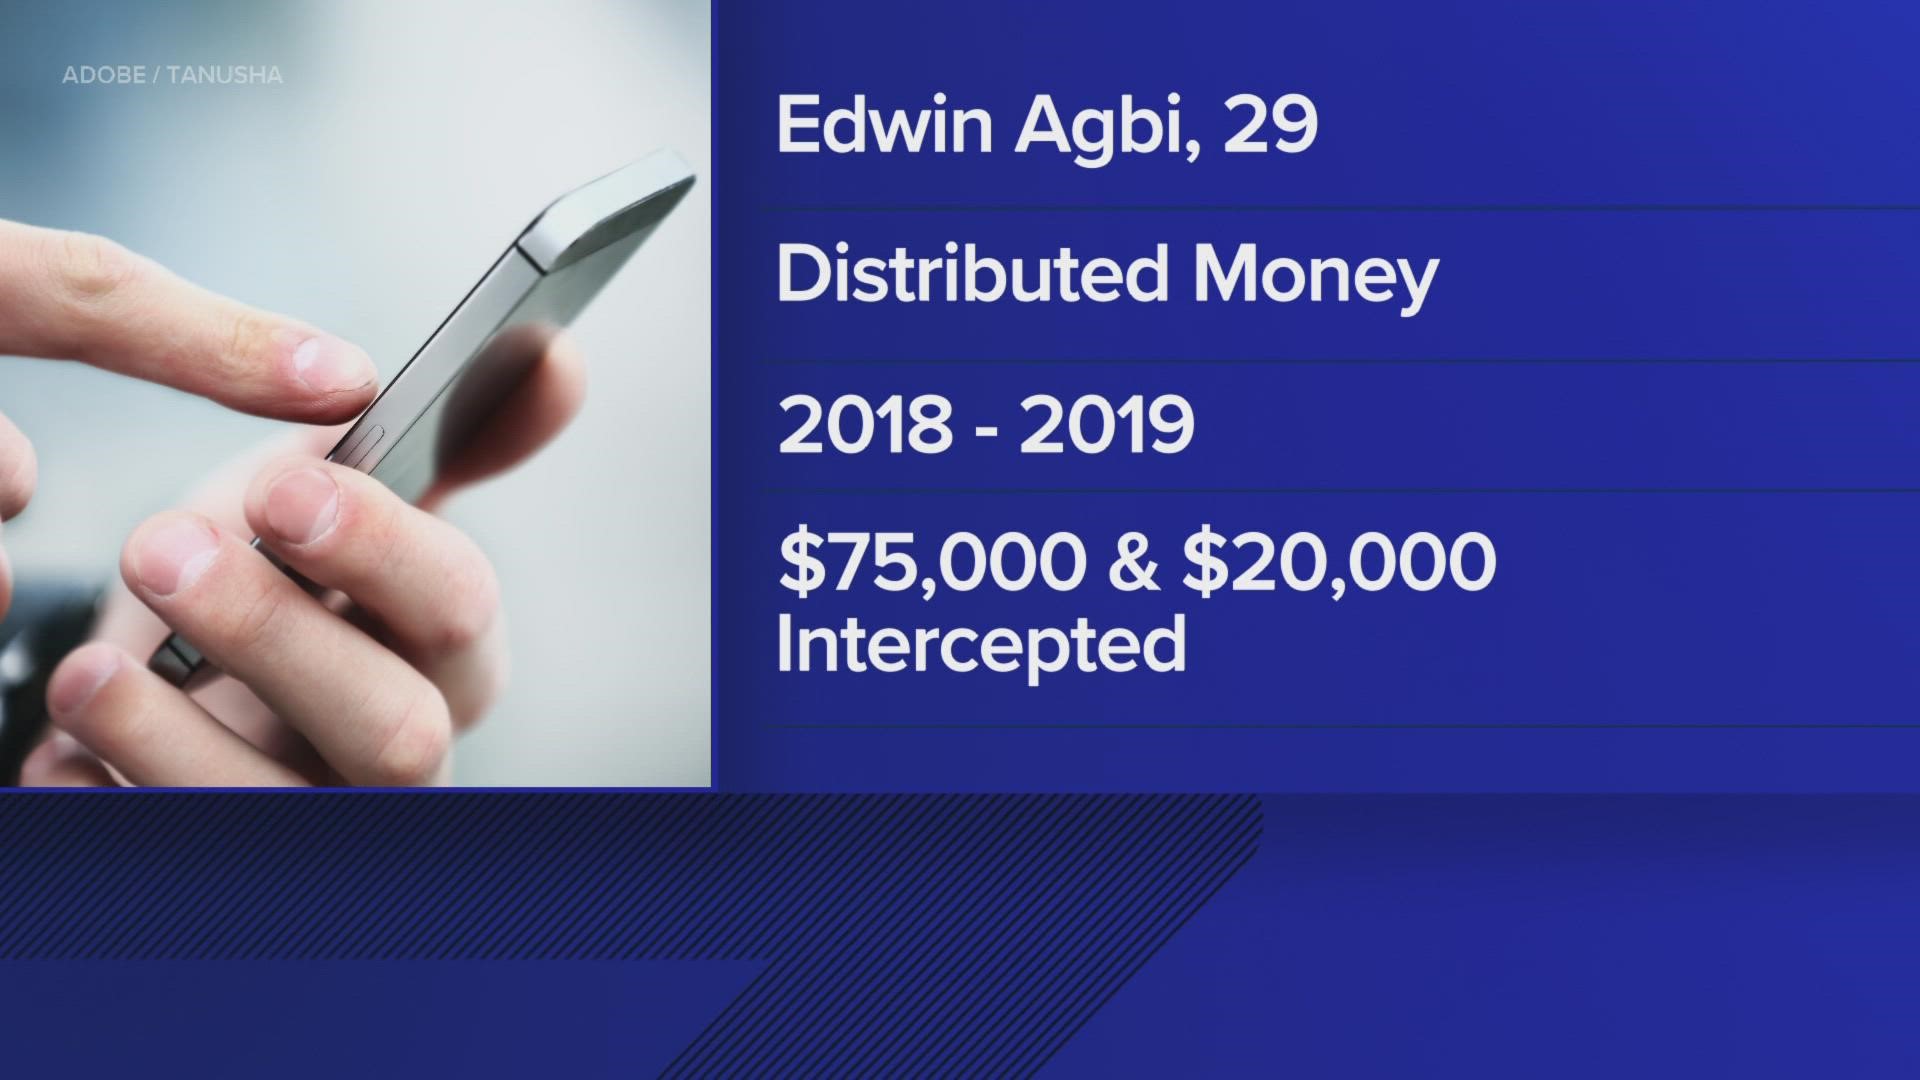 Edwin Agbi was part of an international group creating fake profiles and stealing at least $75,000 from adults over 50.